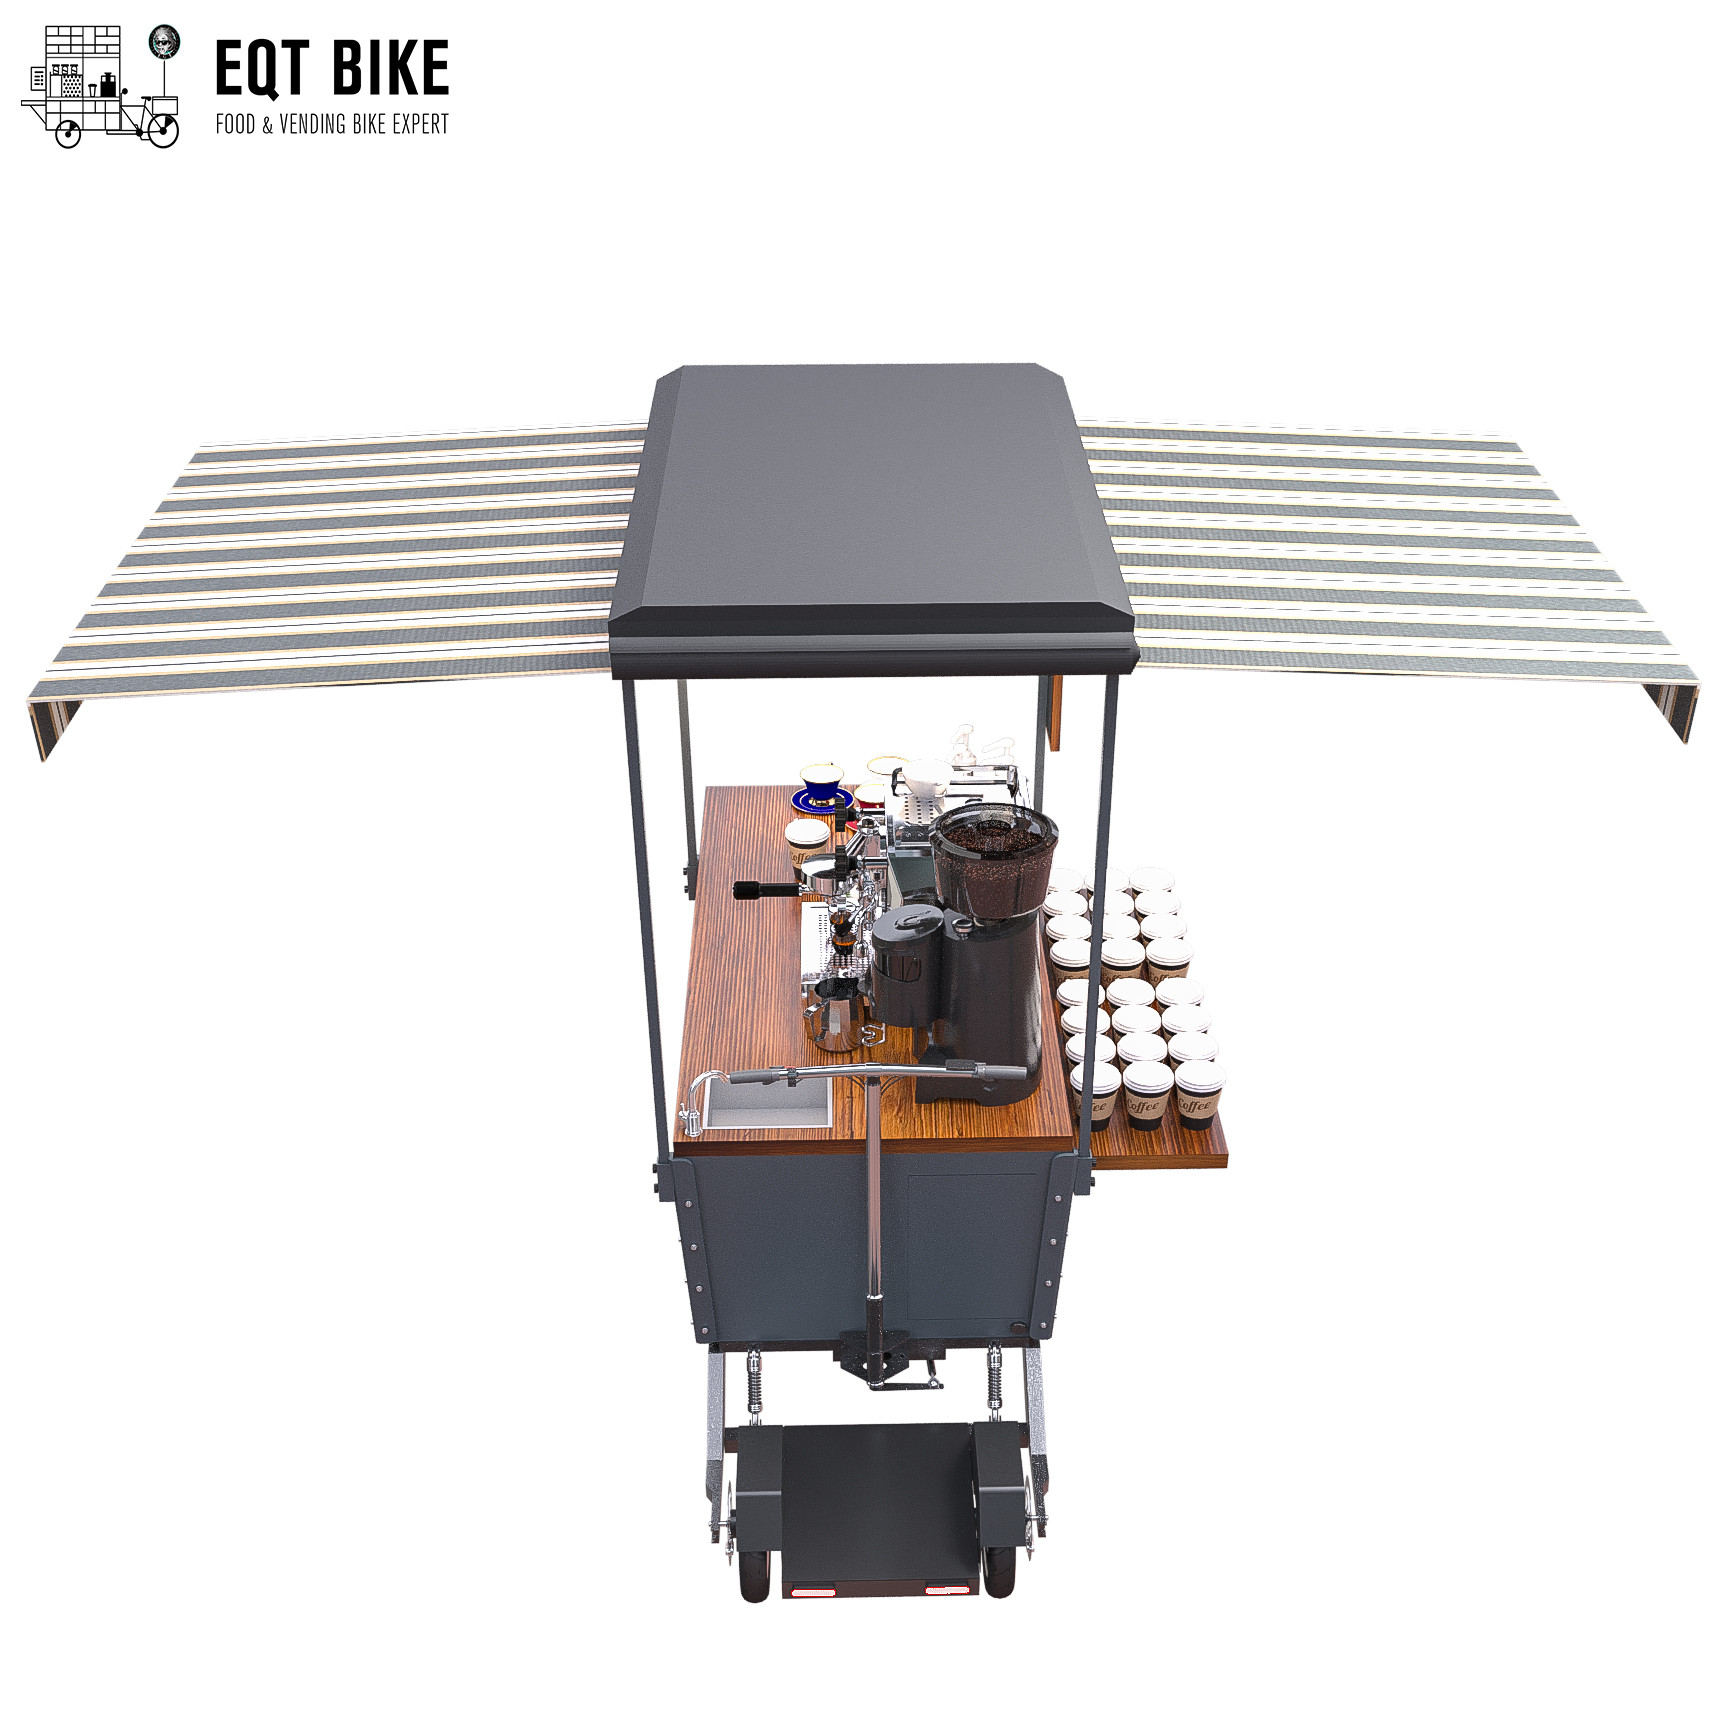 Outdoor Mobile Vending Coffee Bike Cart 48V With Stainless Steel Work Table